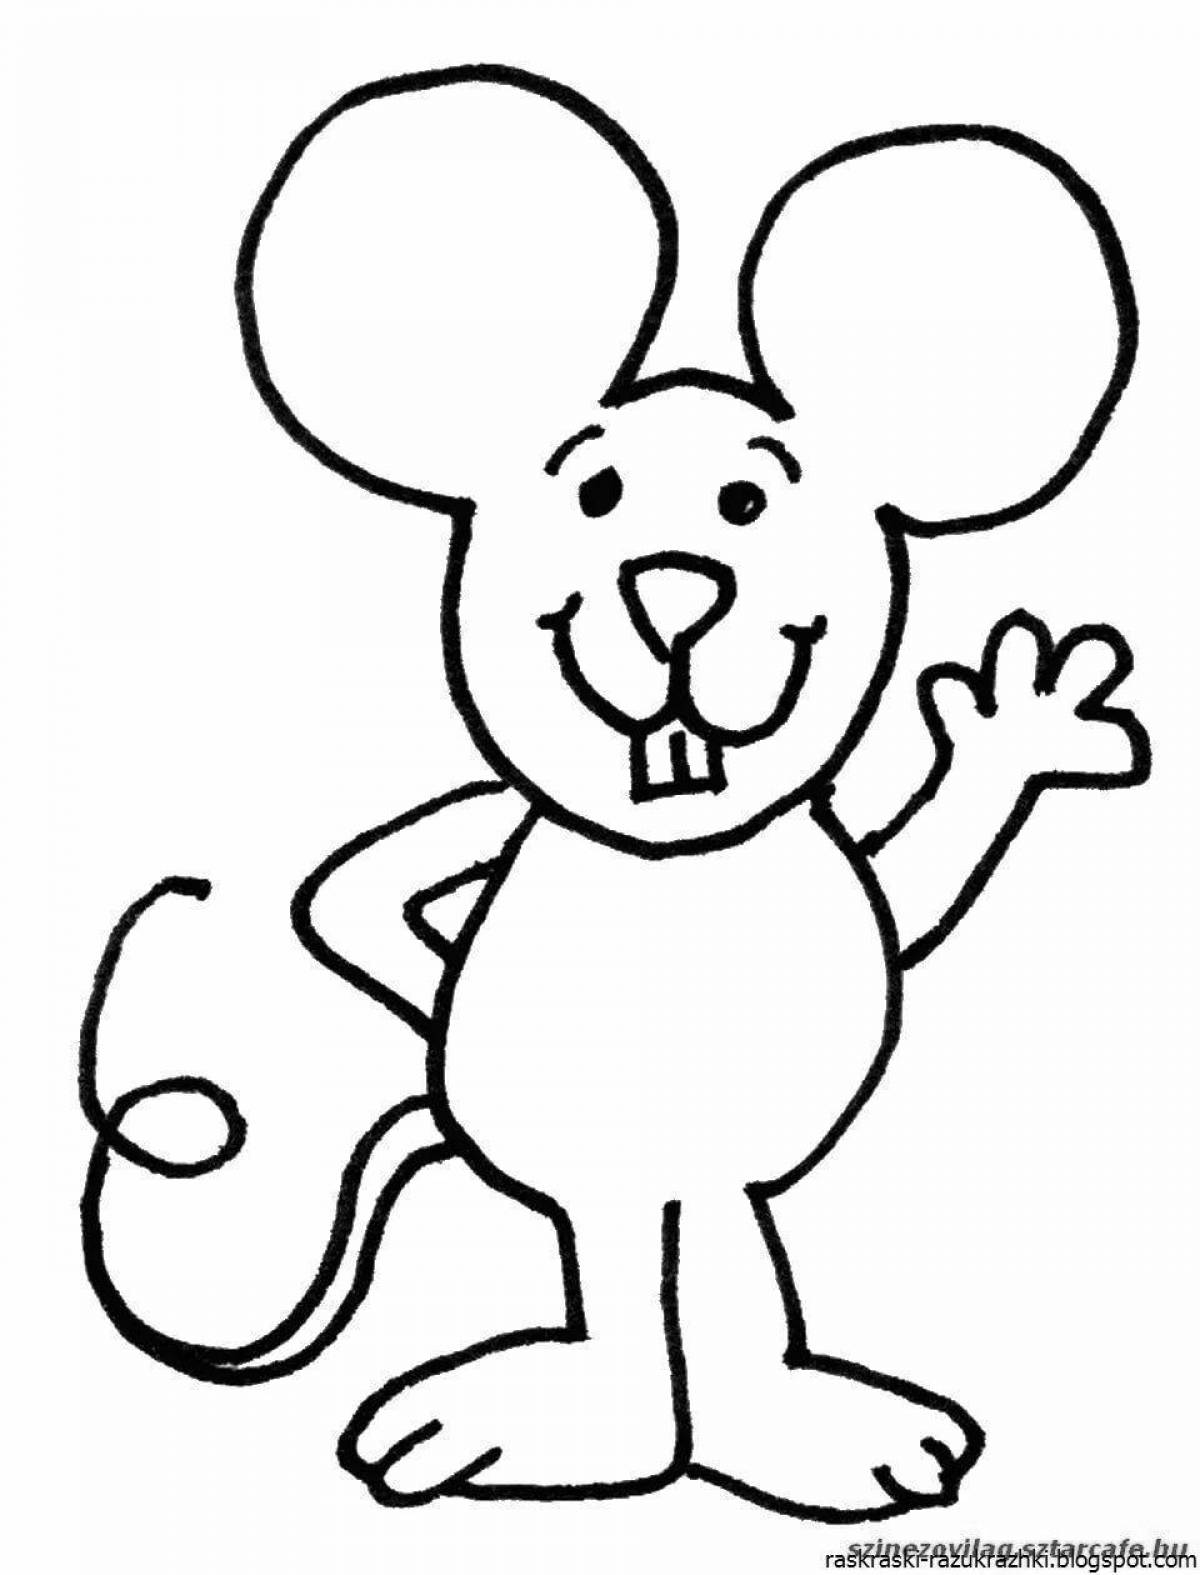 Fancy mouse coloring book